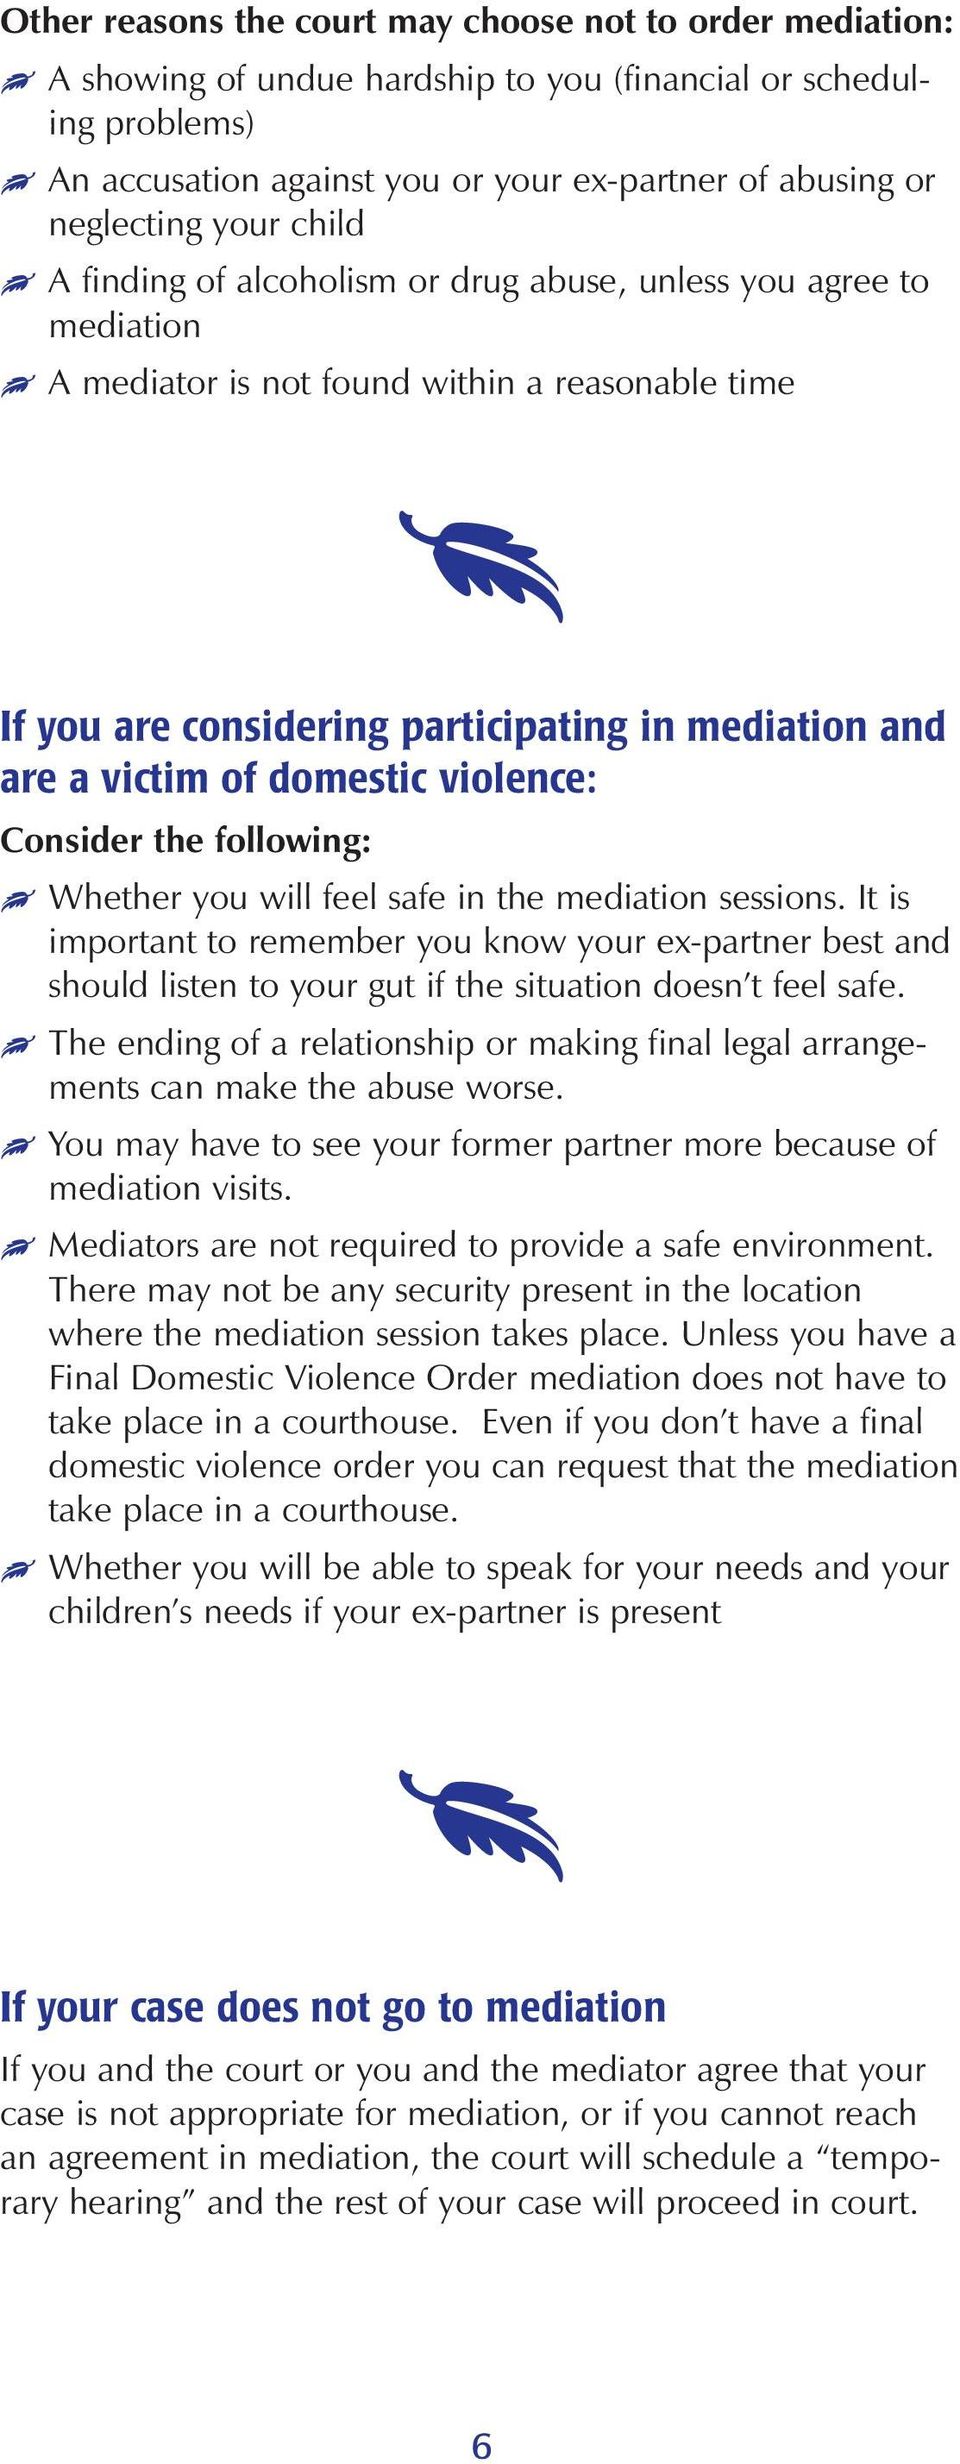 domestic violence: Consider the following: Whether you will feel safe in the mediation sessions.